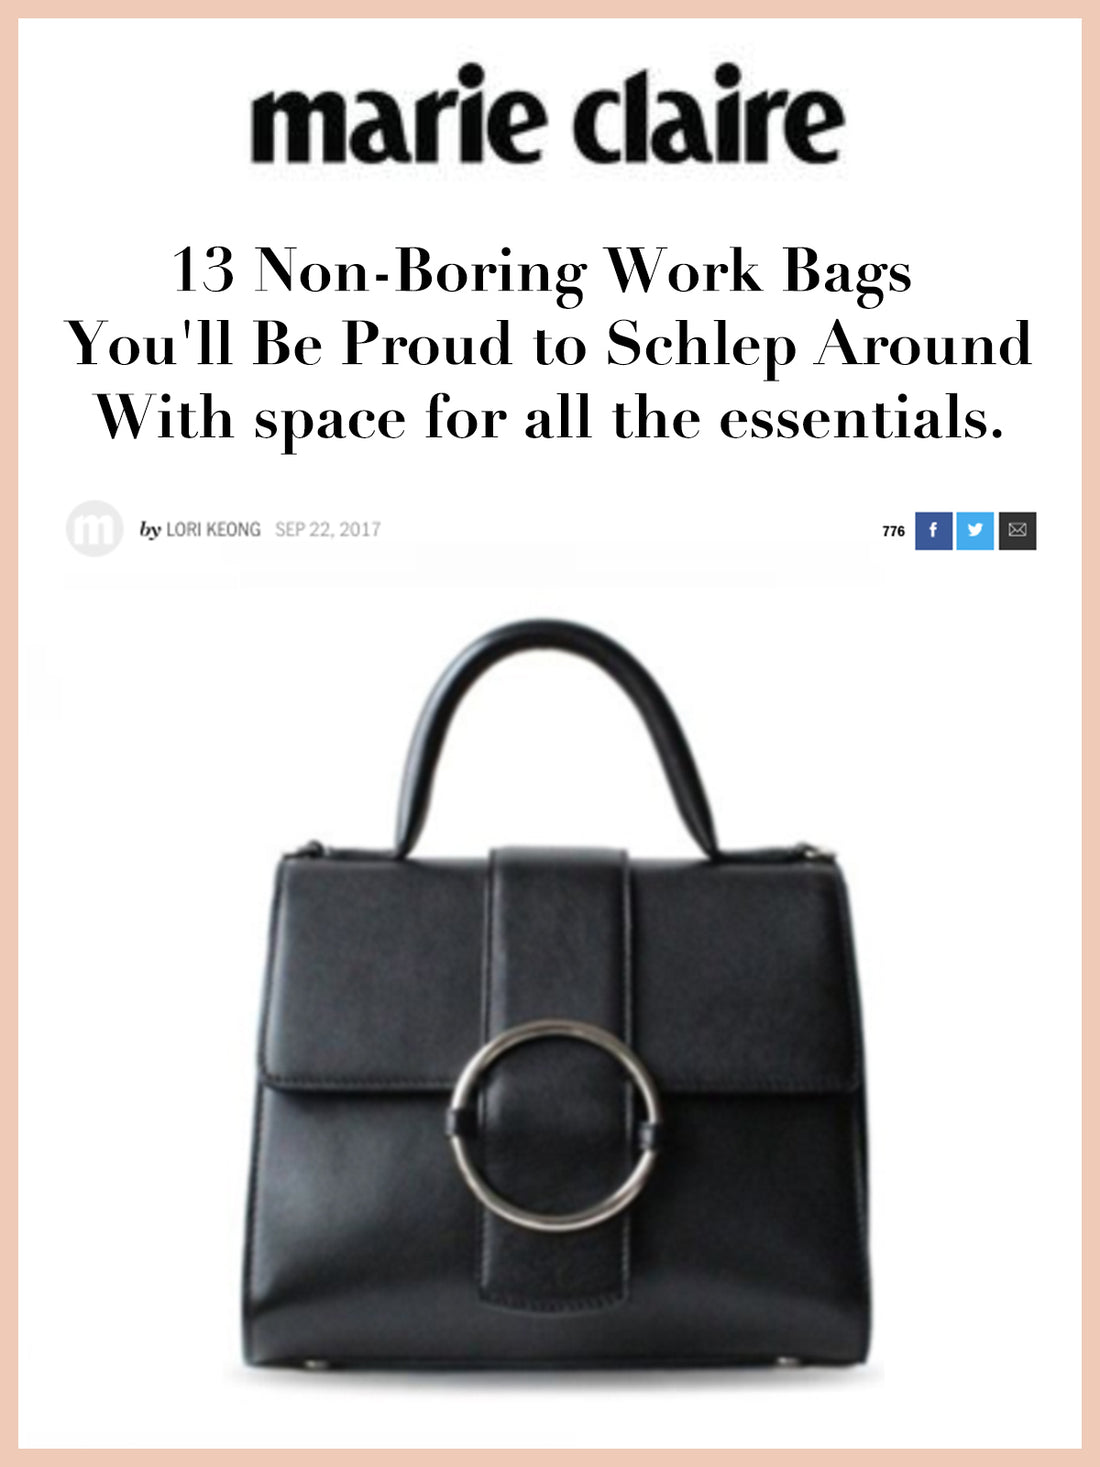 MARIE CLAIRE, 13 Non-Boring Work Bags